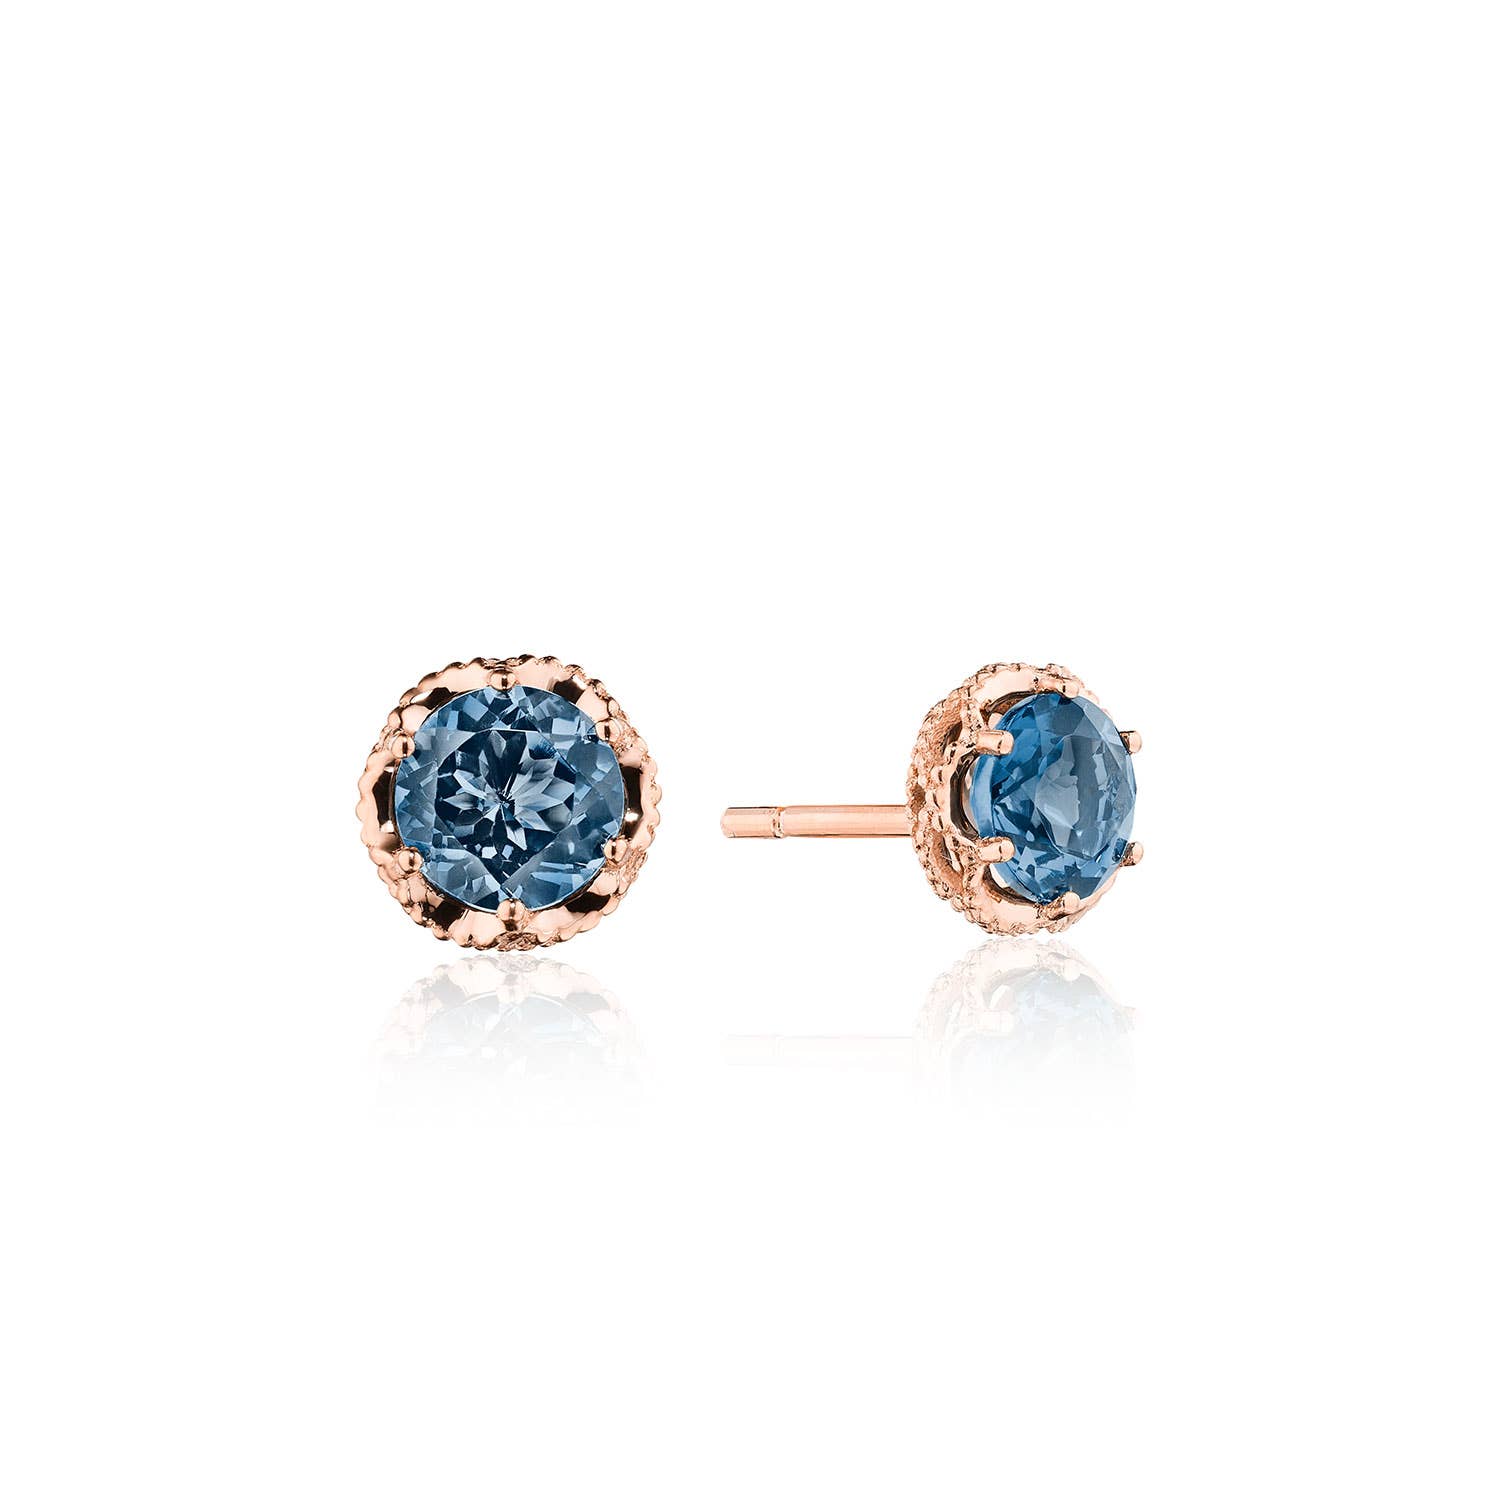 Petite Crescent Crown Studs featuring London Blue Topaz and Rose Gold